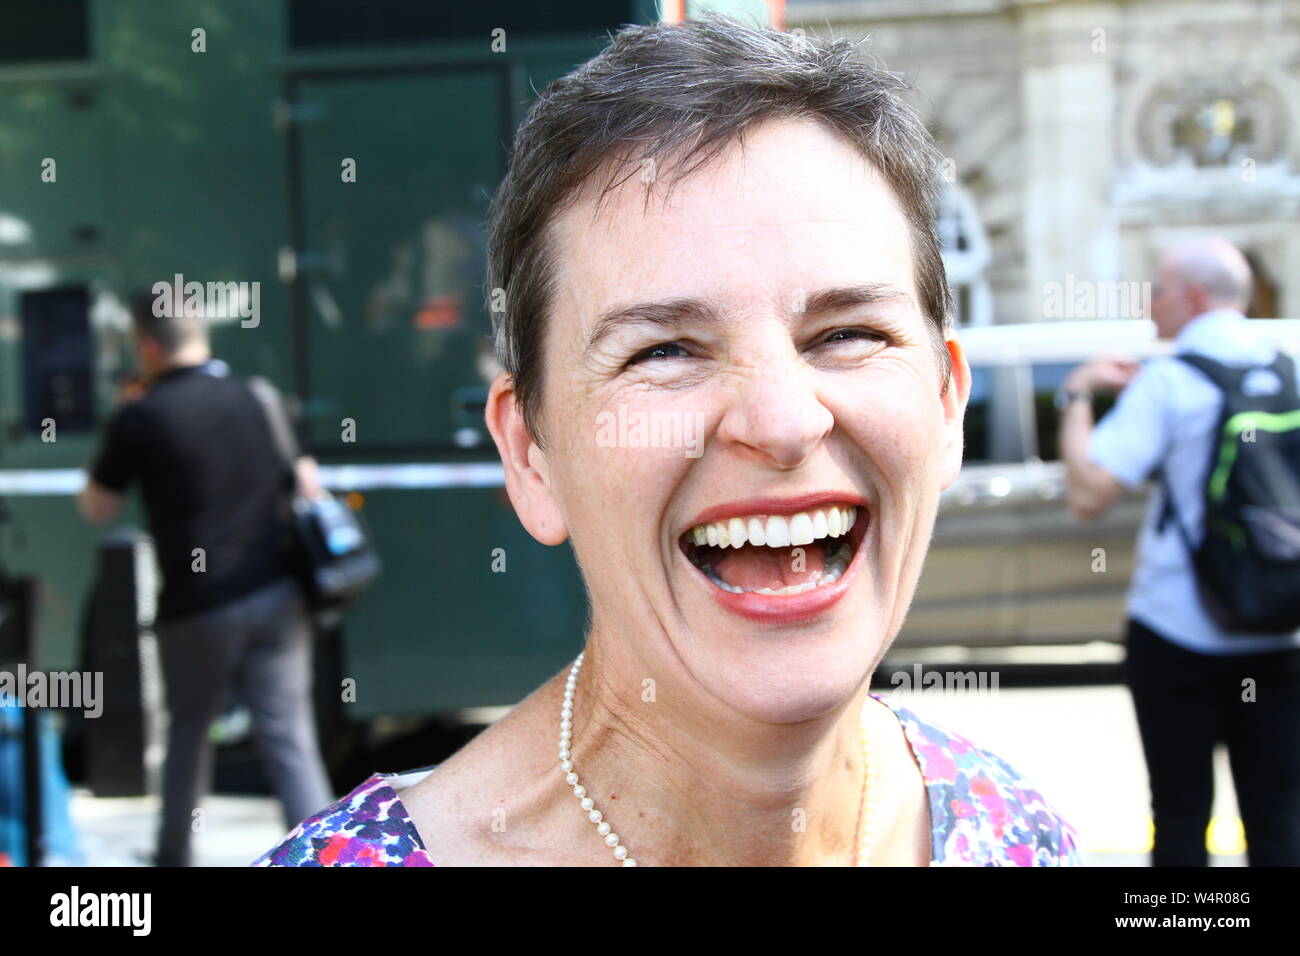 MARY CREAGH LABOUR MP FOR WAKEFIELD IN THE CITY OF WESTMINSTER ON 24TH JULY 2019. BRITISH POLITICIANS. UK POLITICS. LABOUR PARTY MPS. POLITICS. RUSSELL MOORE PORTFOLIO PAGE. Stock Photo